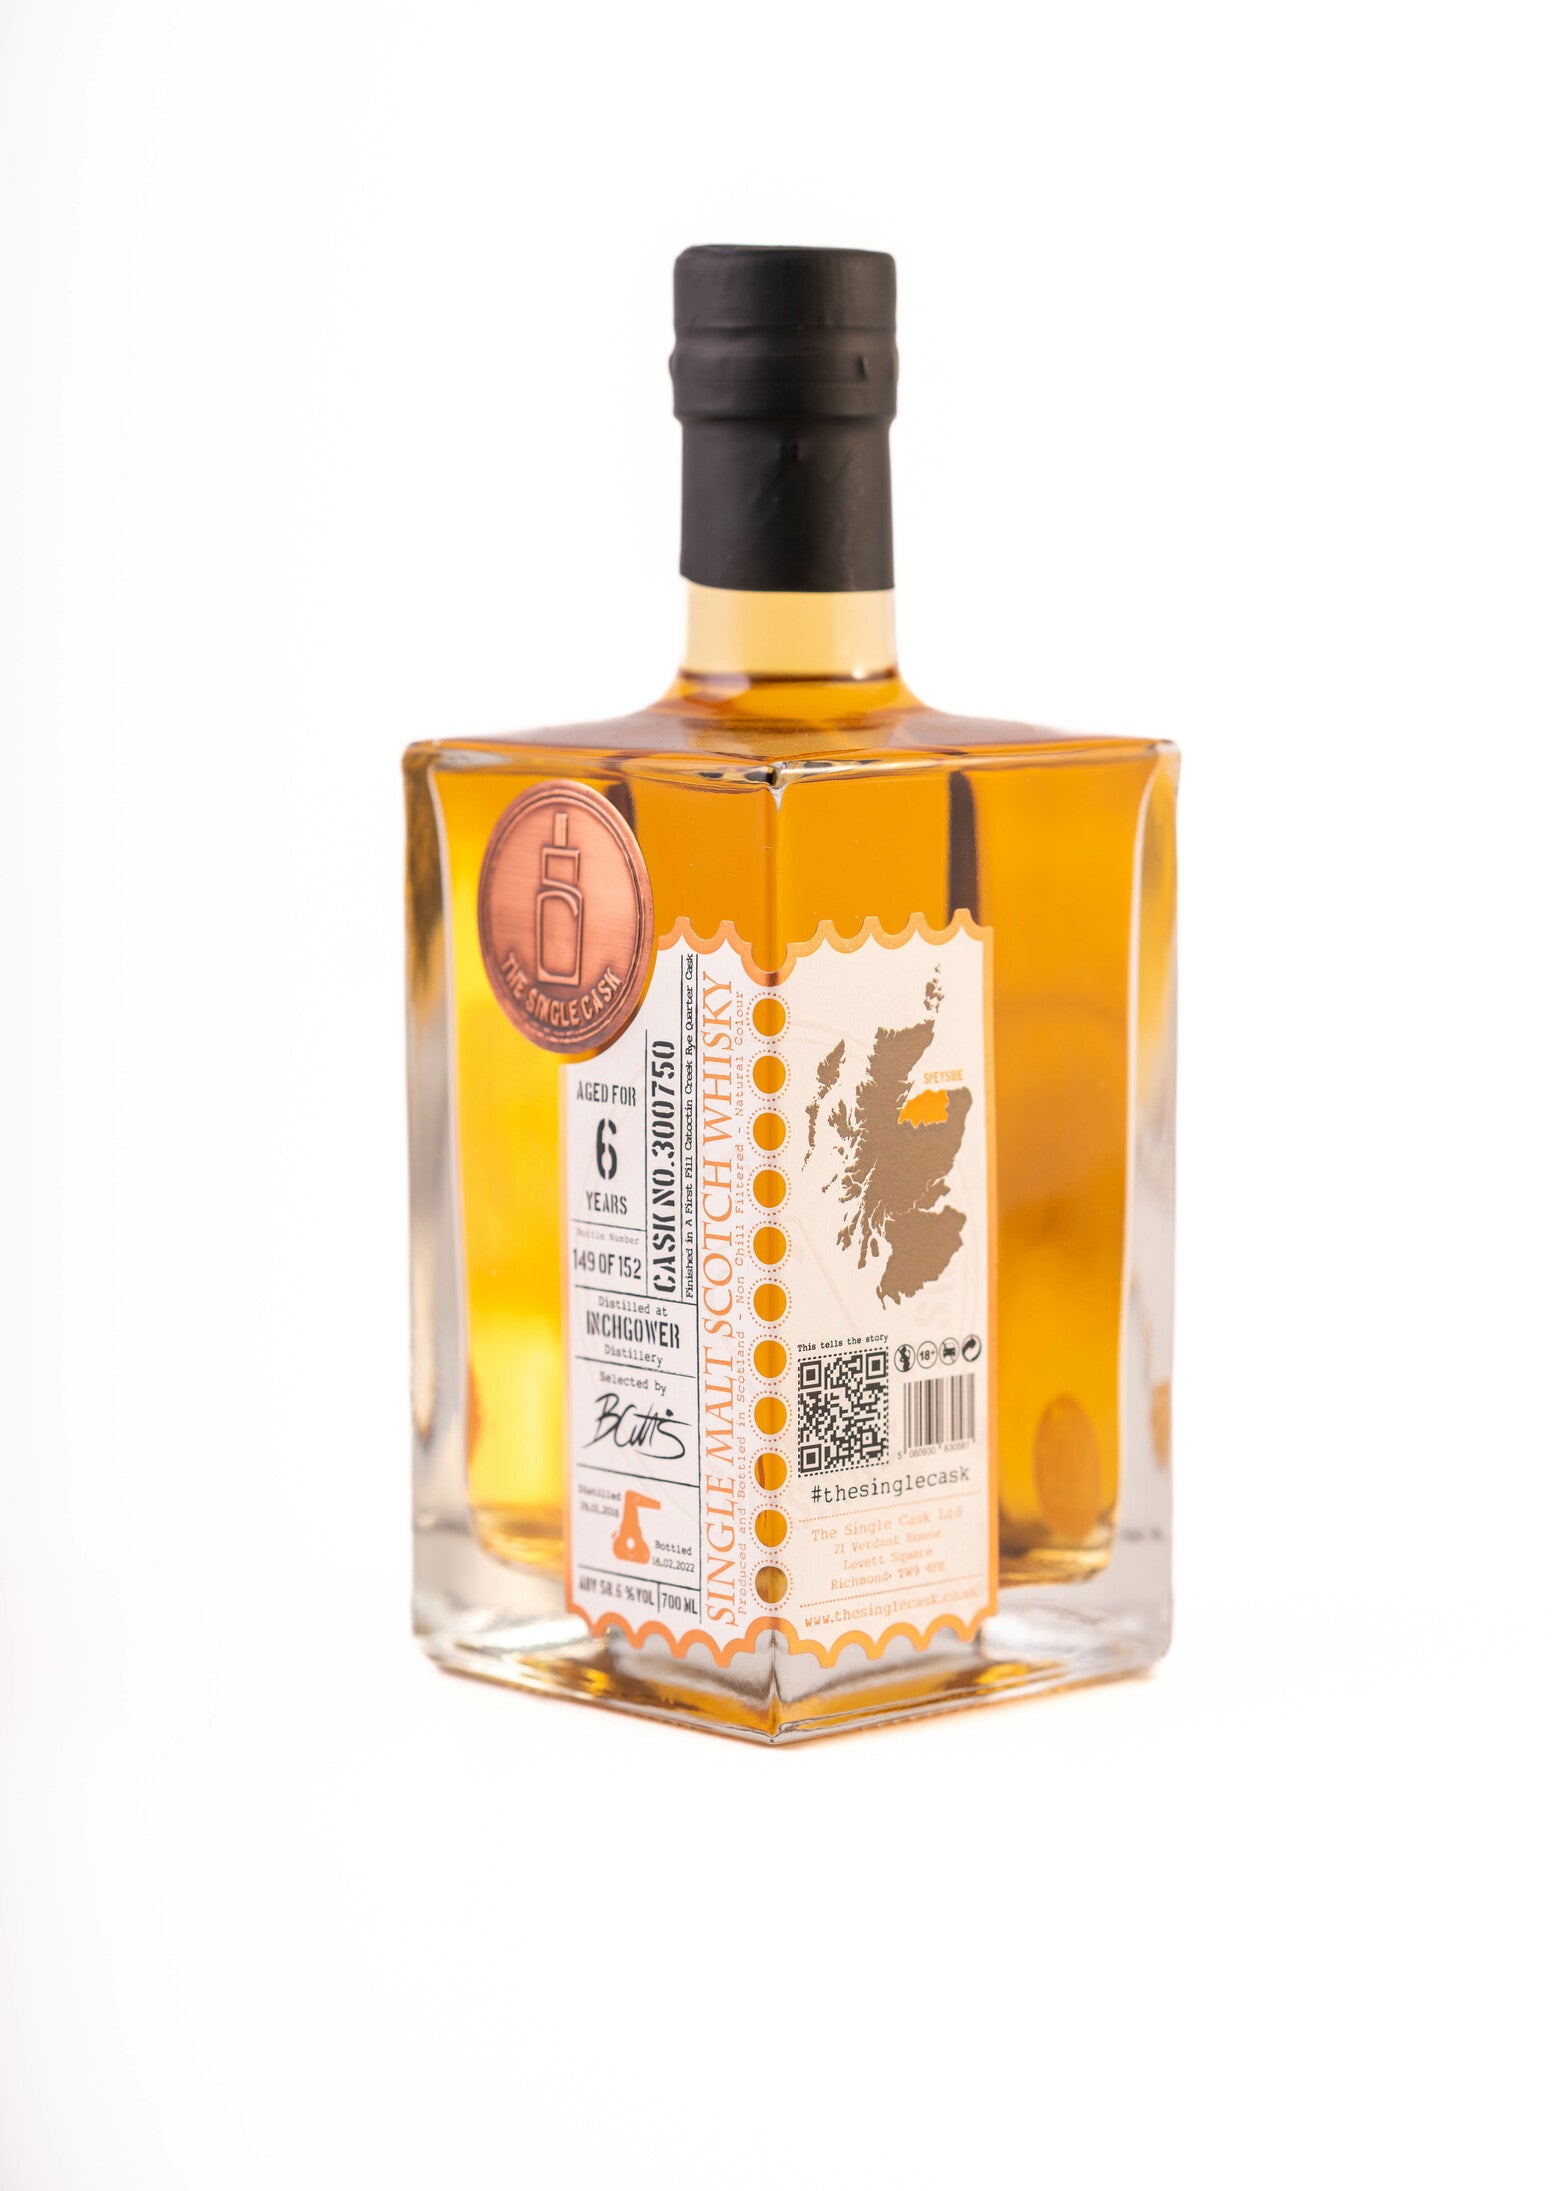 Inchgower 6 years old single cask scotch whisky